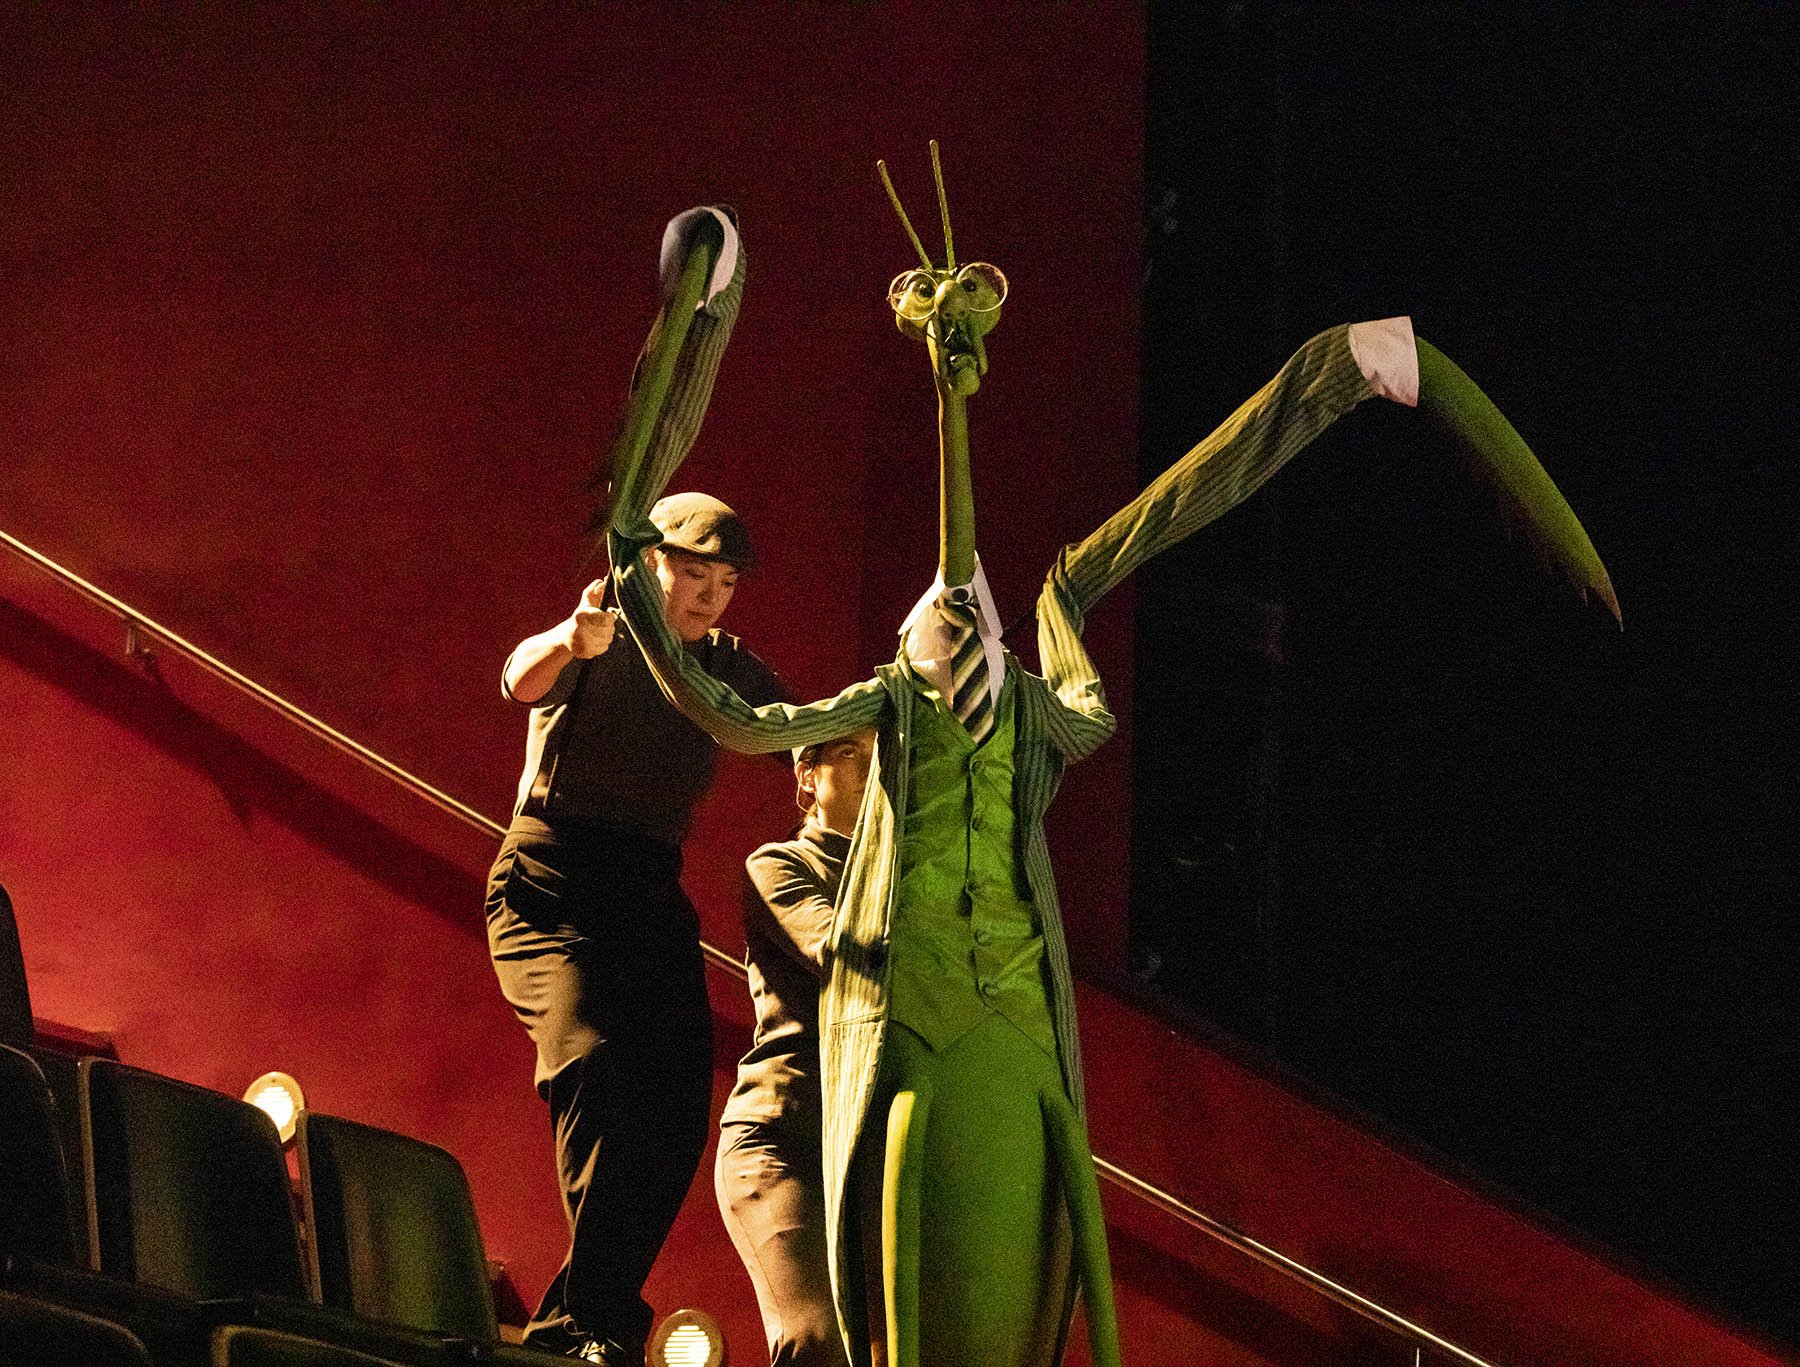  Jacob Rees-Mogg as a Praying Mantis puppet making its entrance during rehearsals for the Spitting Image stage show at Birmingham Rep Theatre. 